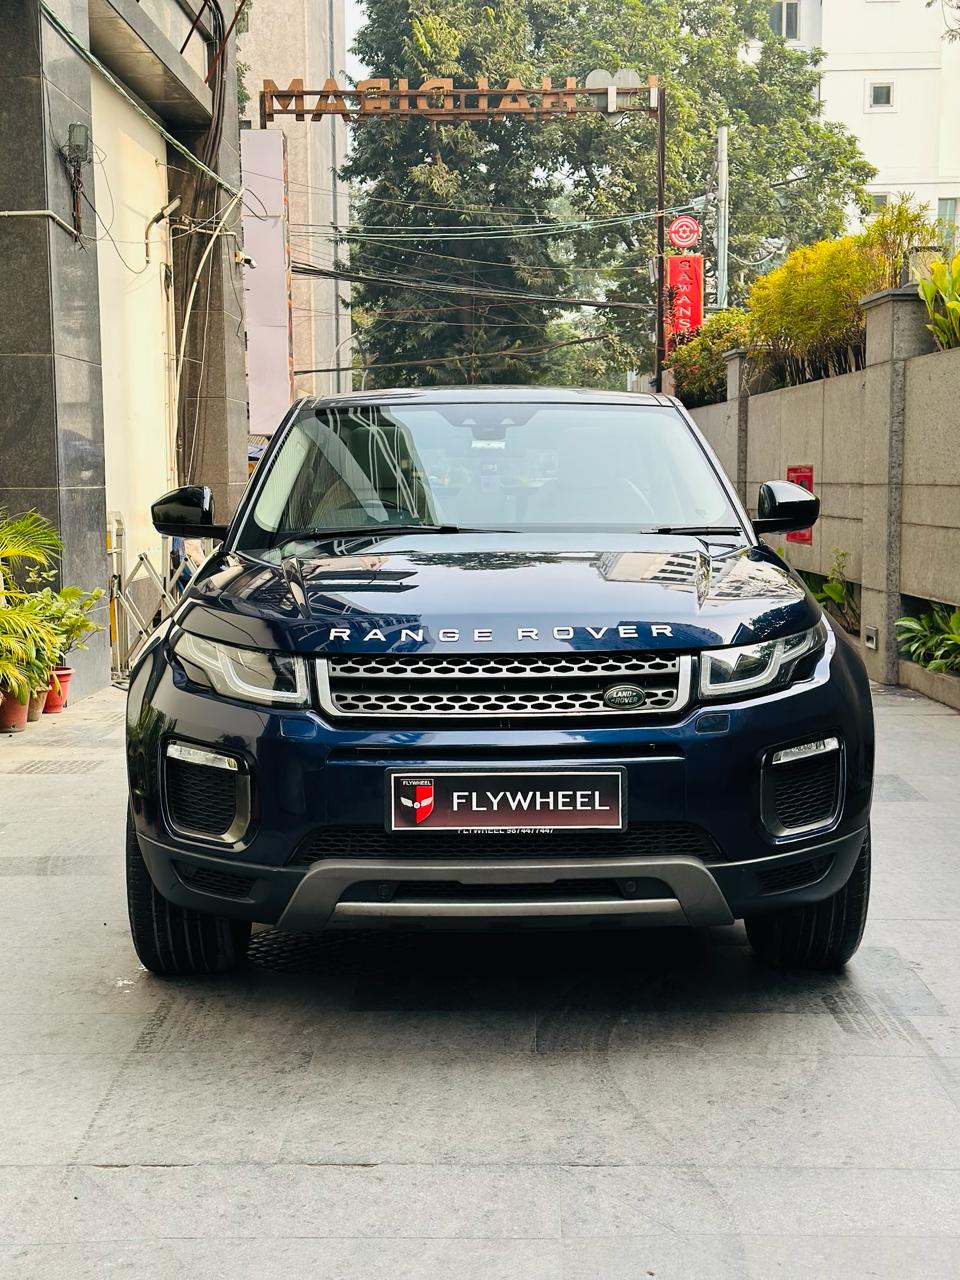 Range Rover Evoque 2017 HSE: Technology and Comfort